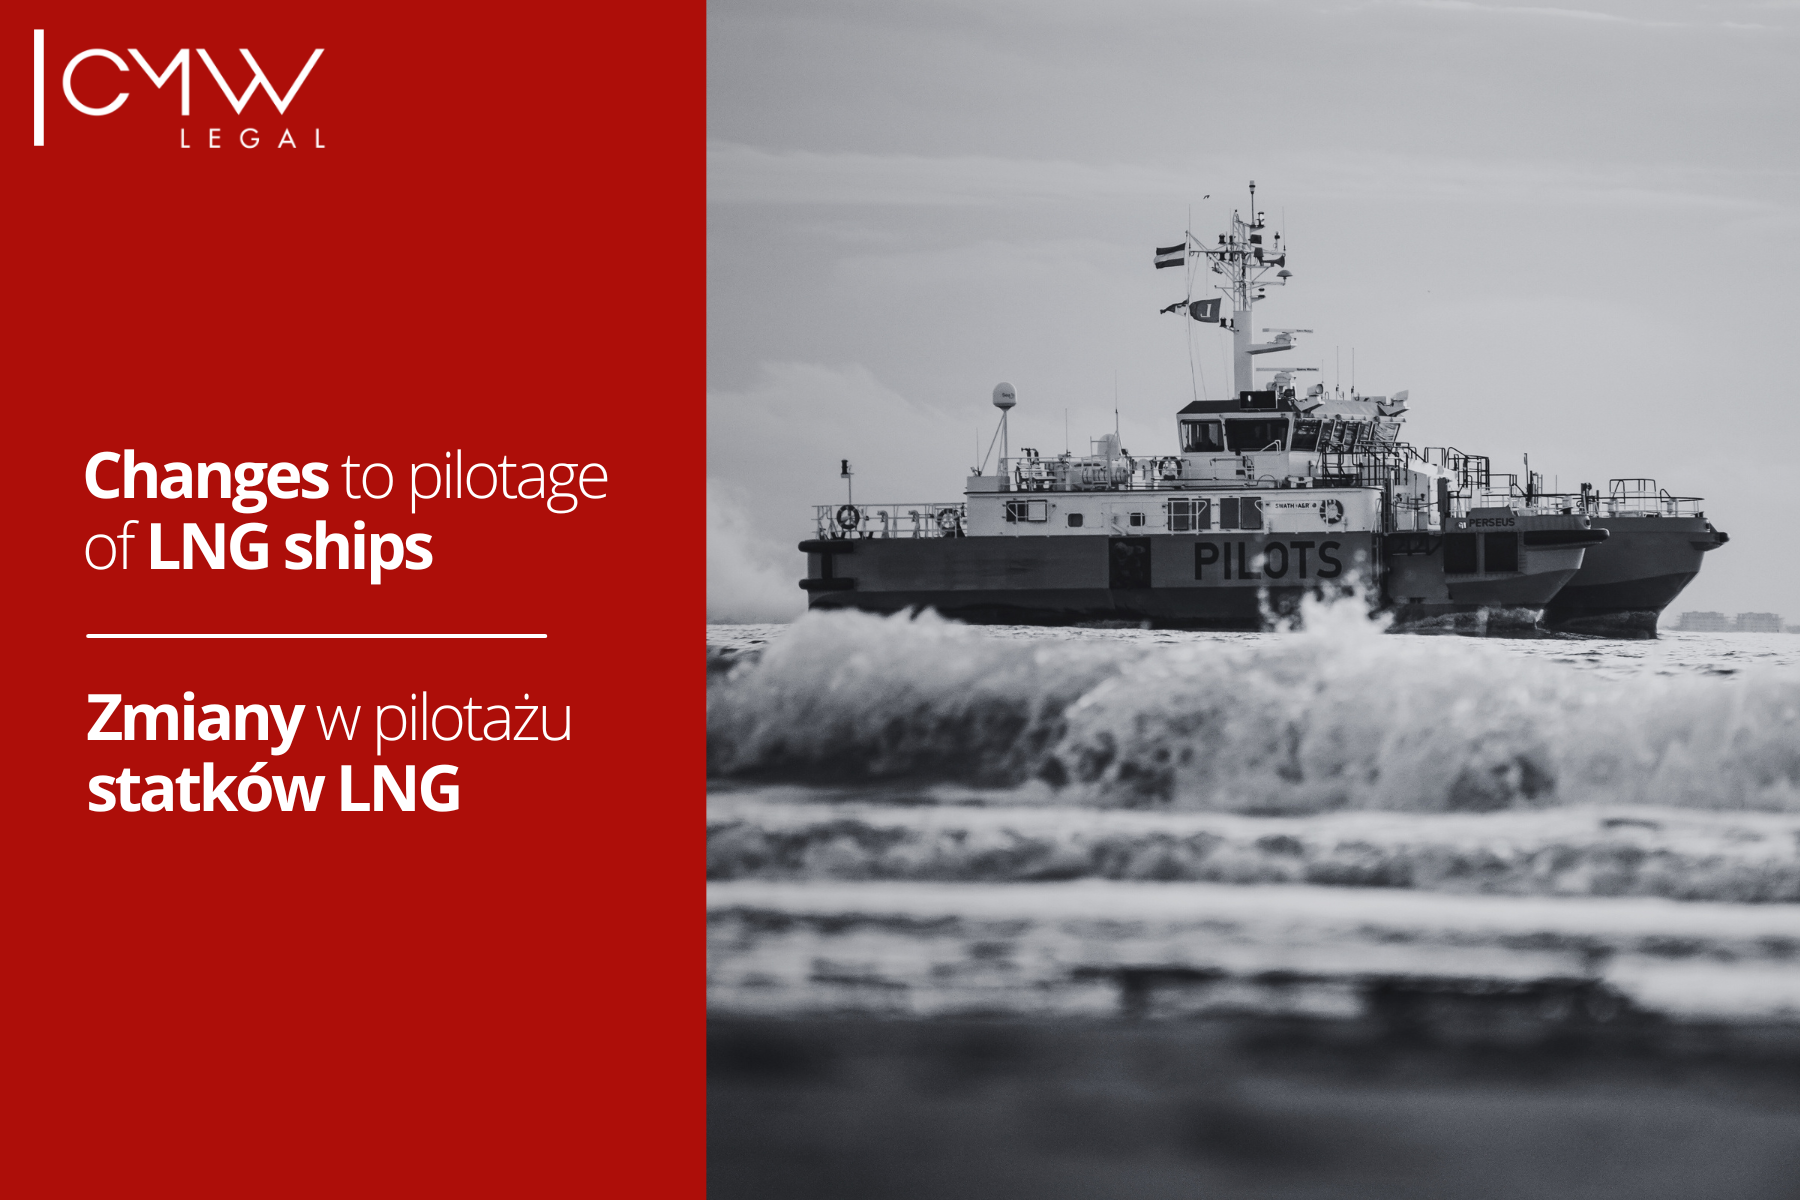  Entry into force of amendment to LNG tanker marine pilotage regulations